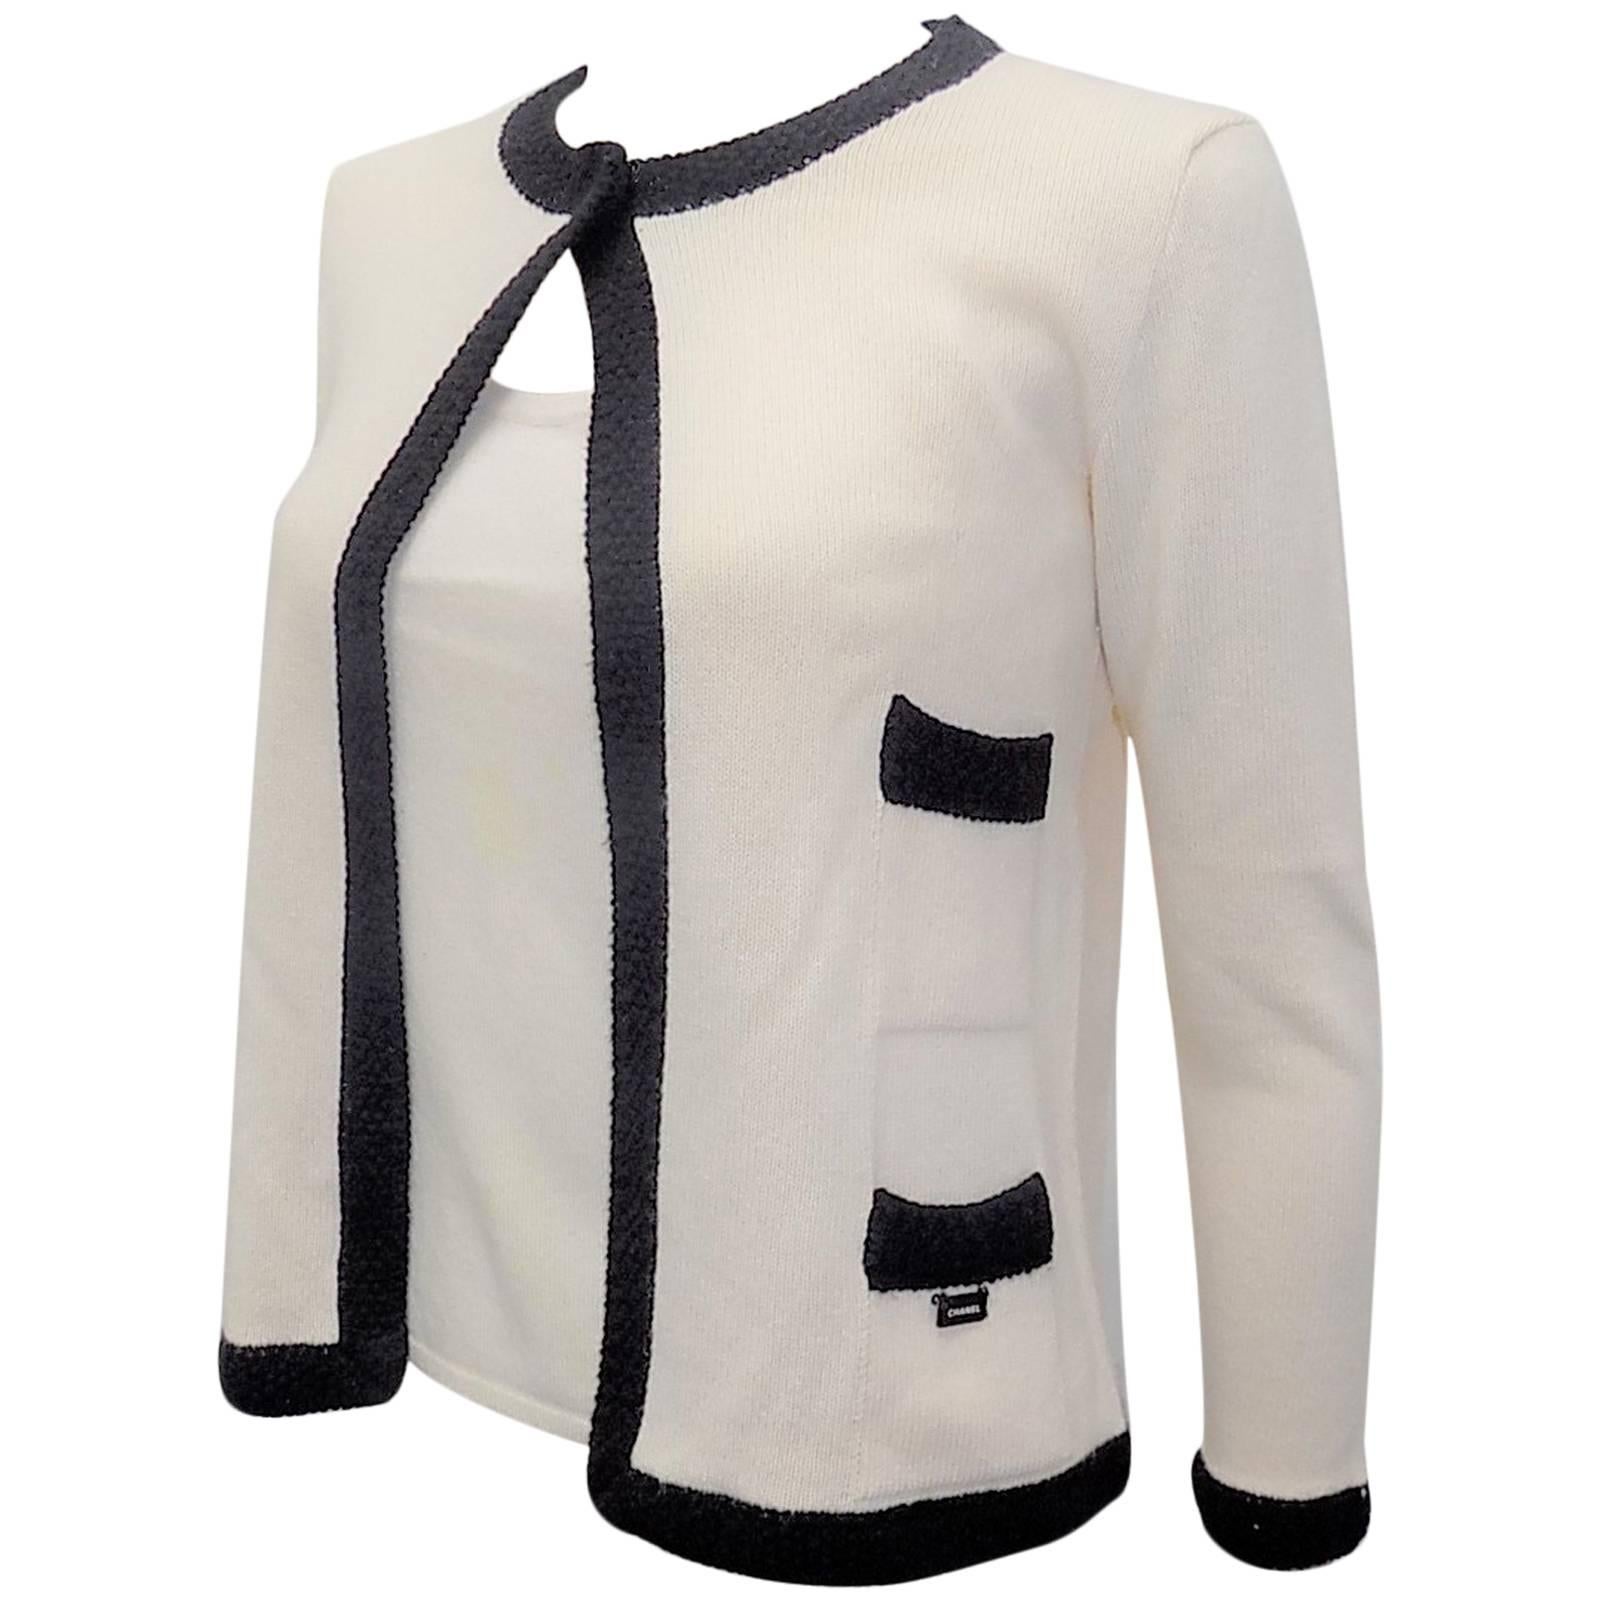 Chanel  Cashmere Ivory - black sweater set cardigan and top 